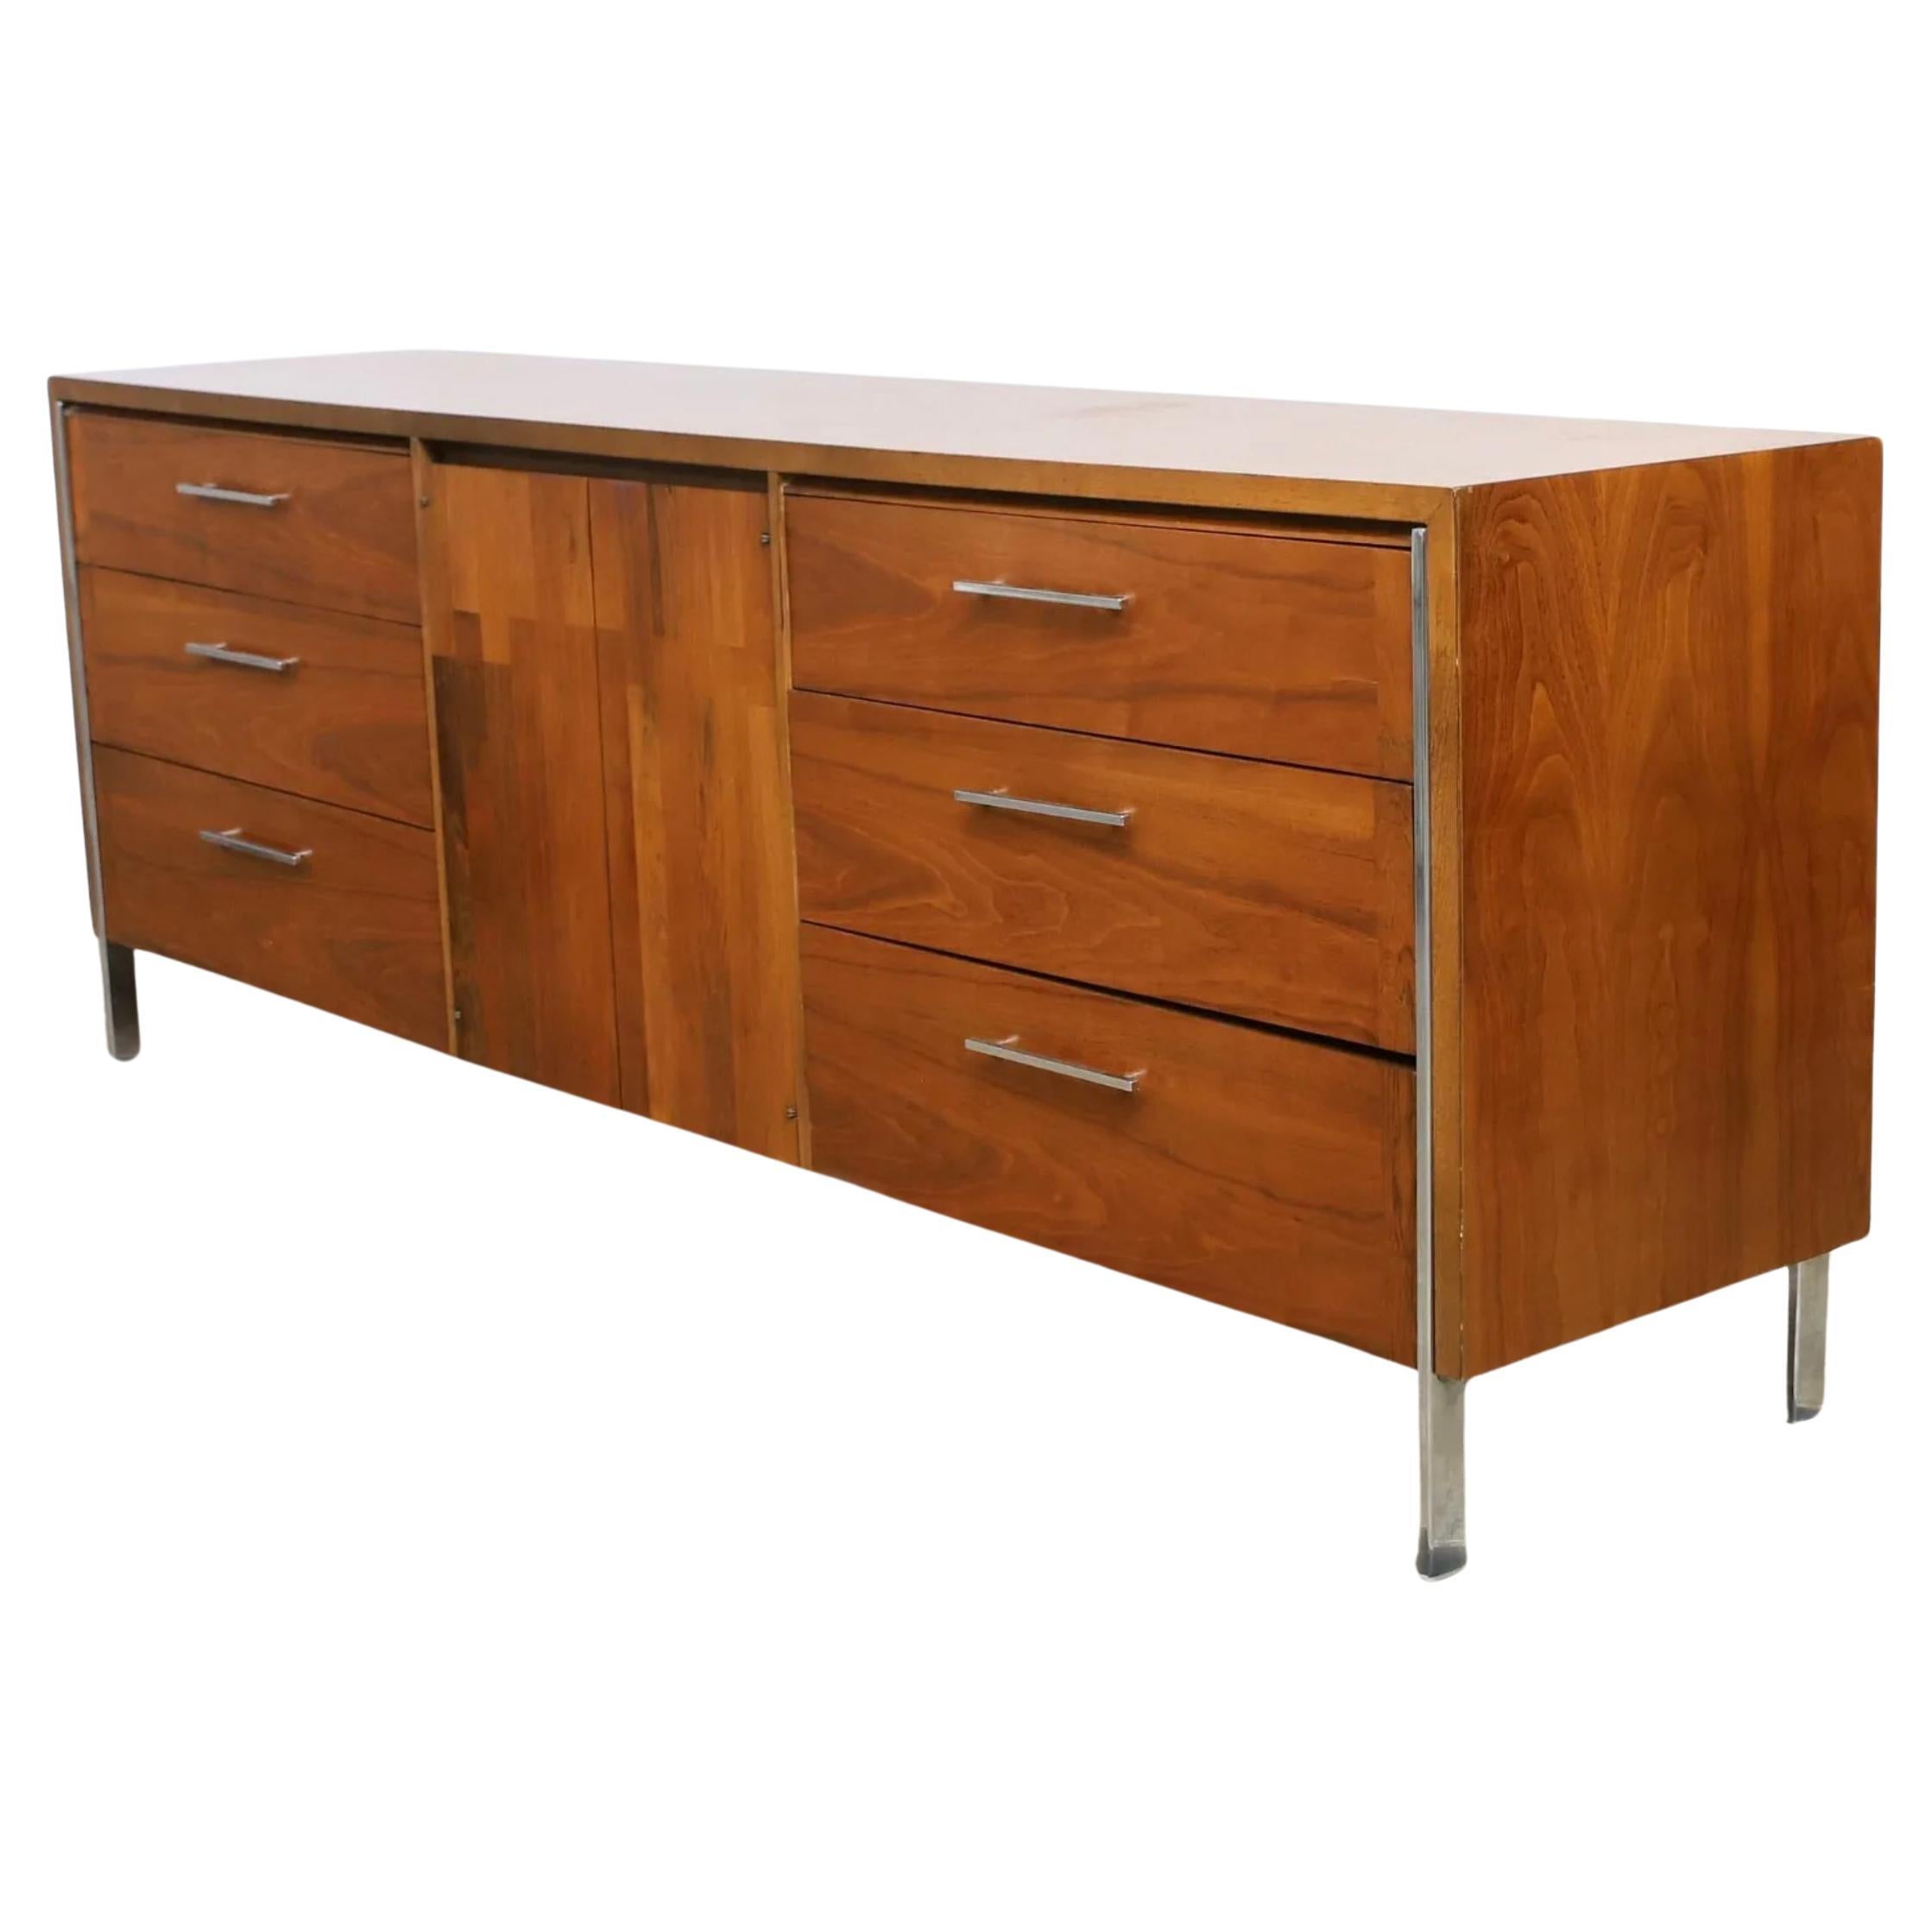 Rare Mid-Century Modern Lane patchwork walnut and rosewood credenza sideboard circa 1970s well built. Has 2 center front cabinet doors with 3 drawers behind them. Has 6 drawers with chrome handles on the left and right front with lots of storage.